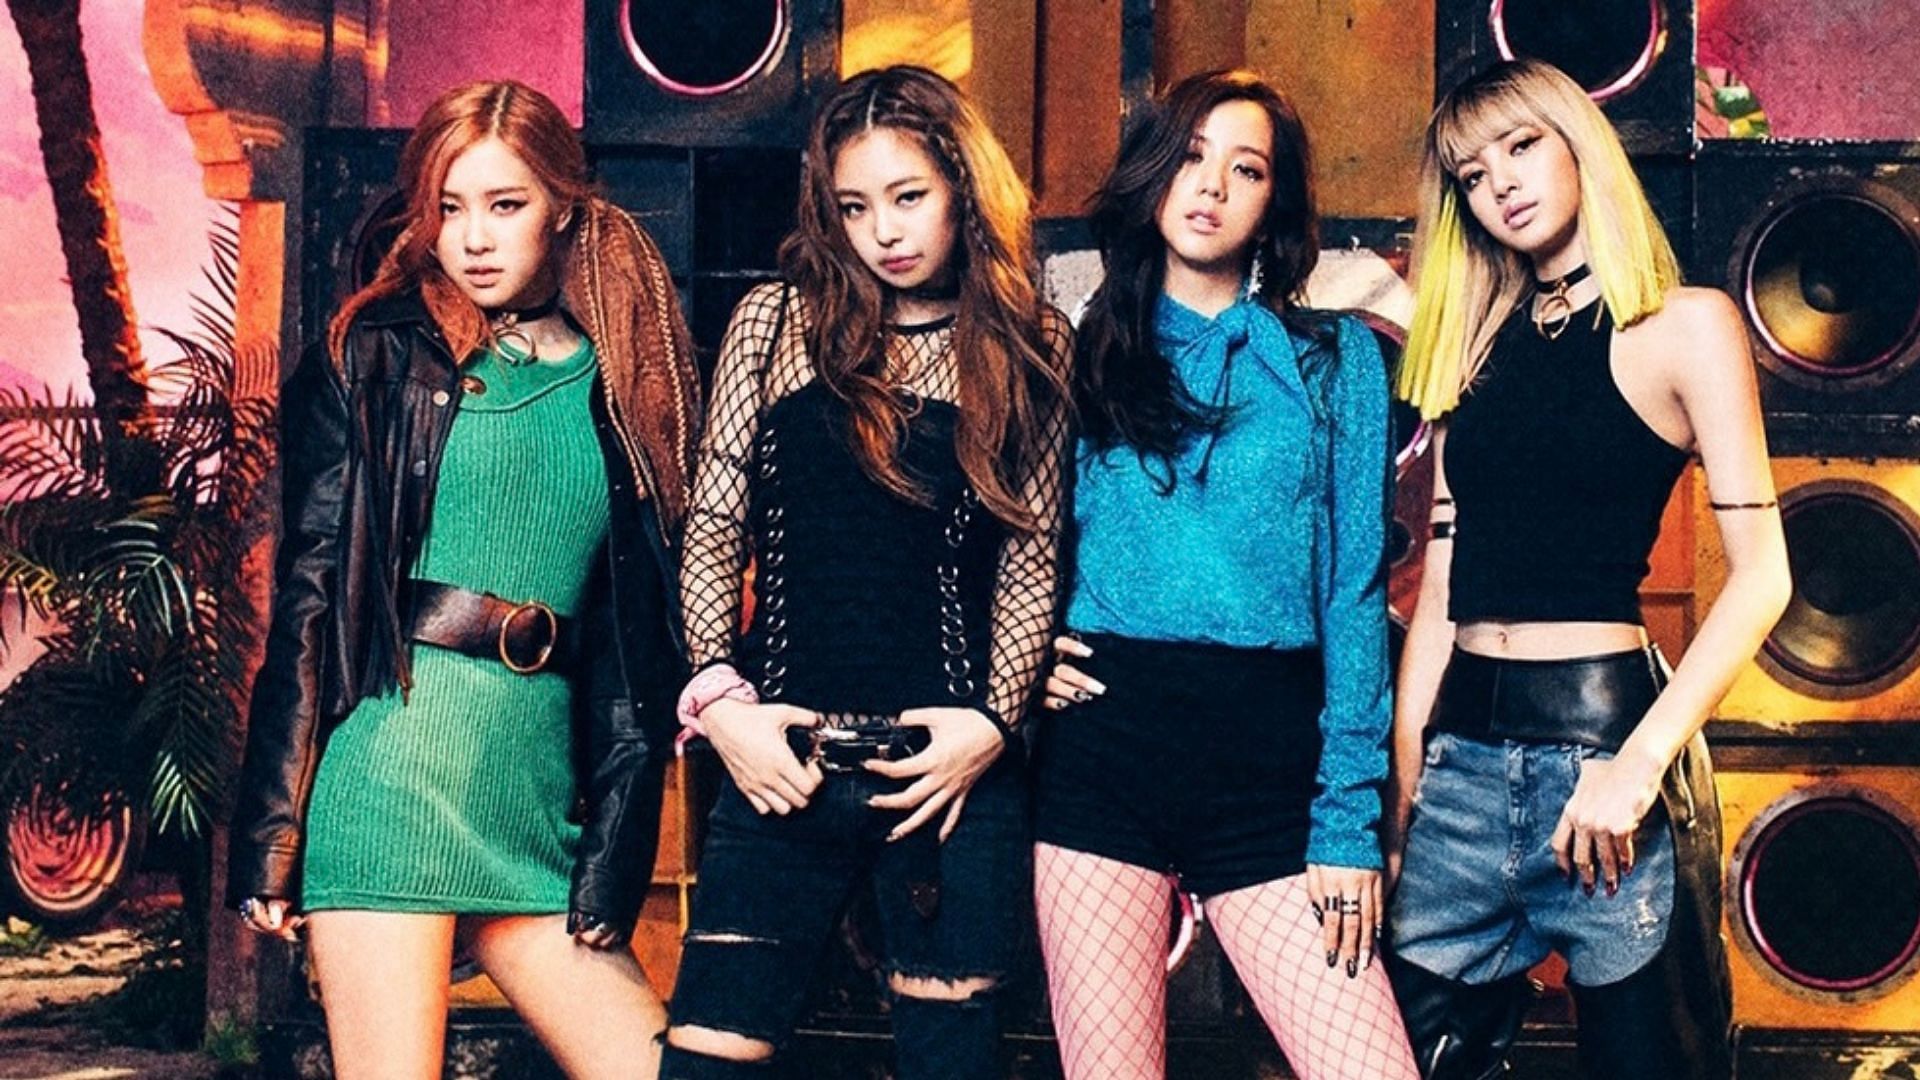 BLACKPINK's 'BOOMBAYAH' becomes first K-pop music video to hit 1.4 ...